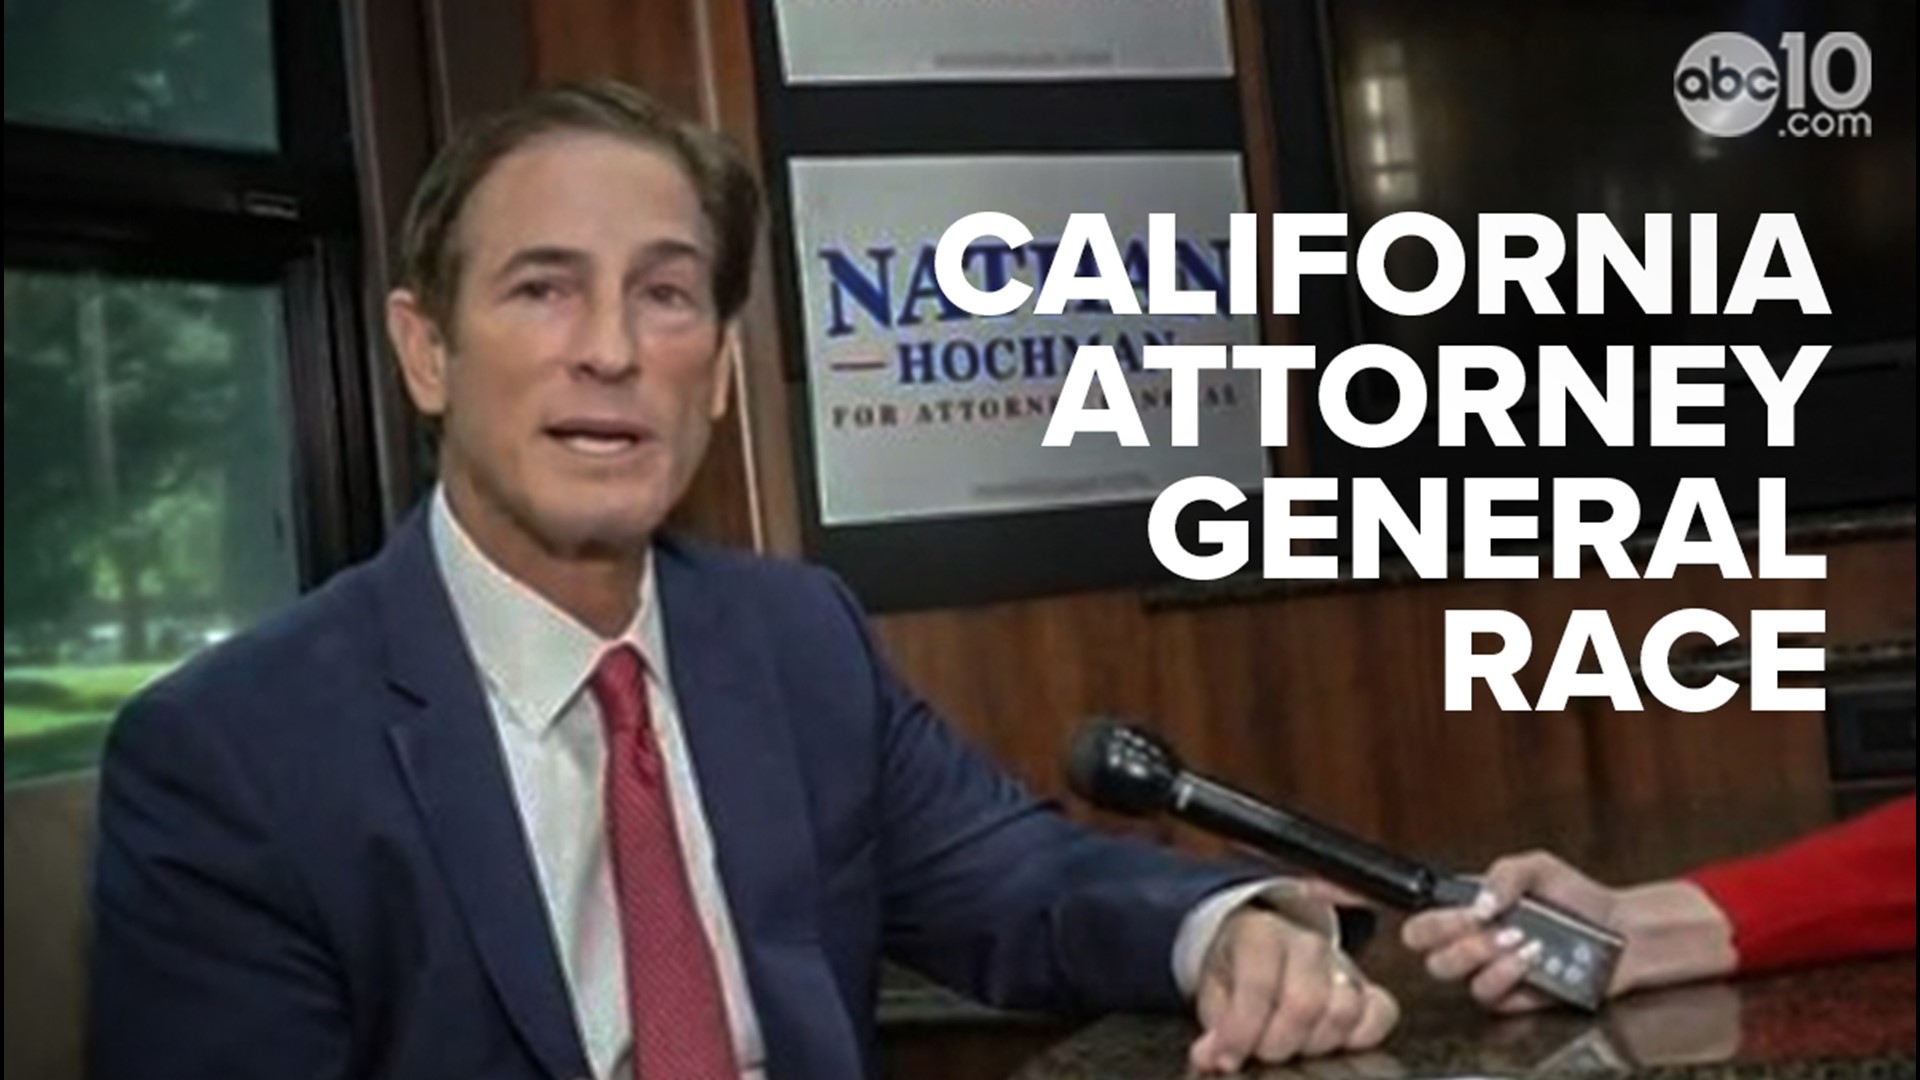 ABC10 political reporter Morgan Rynor sat down with California Attorney General candidate Nathan Hochman to talk, gun policy, criminal justice reform and more.